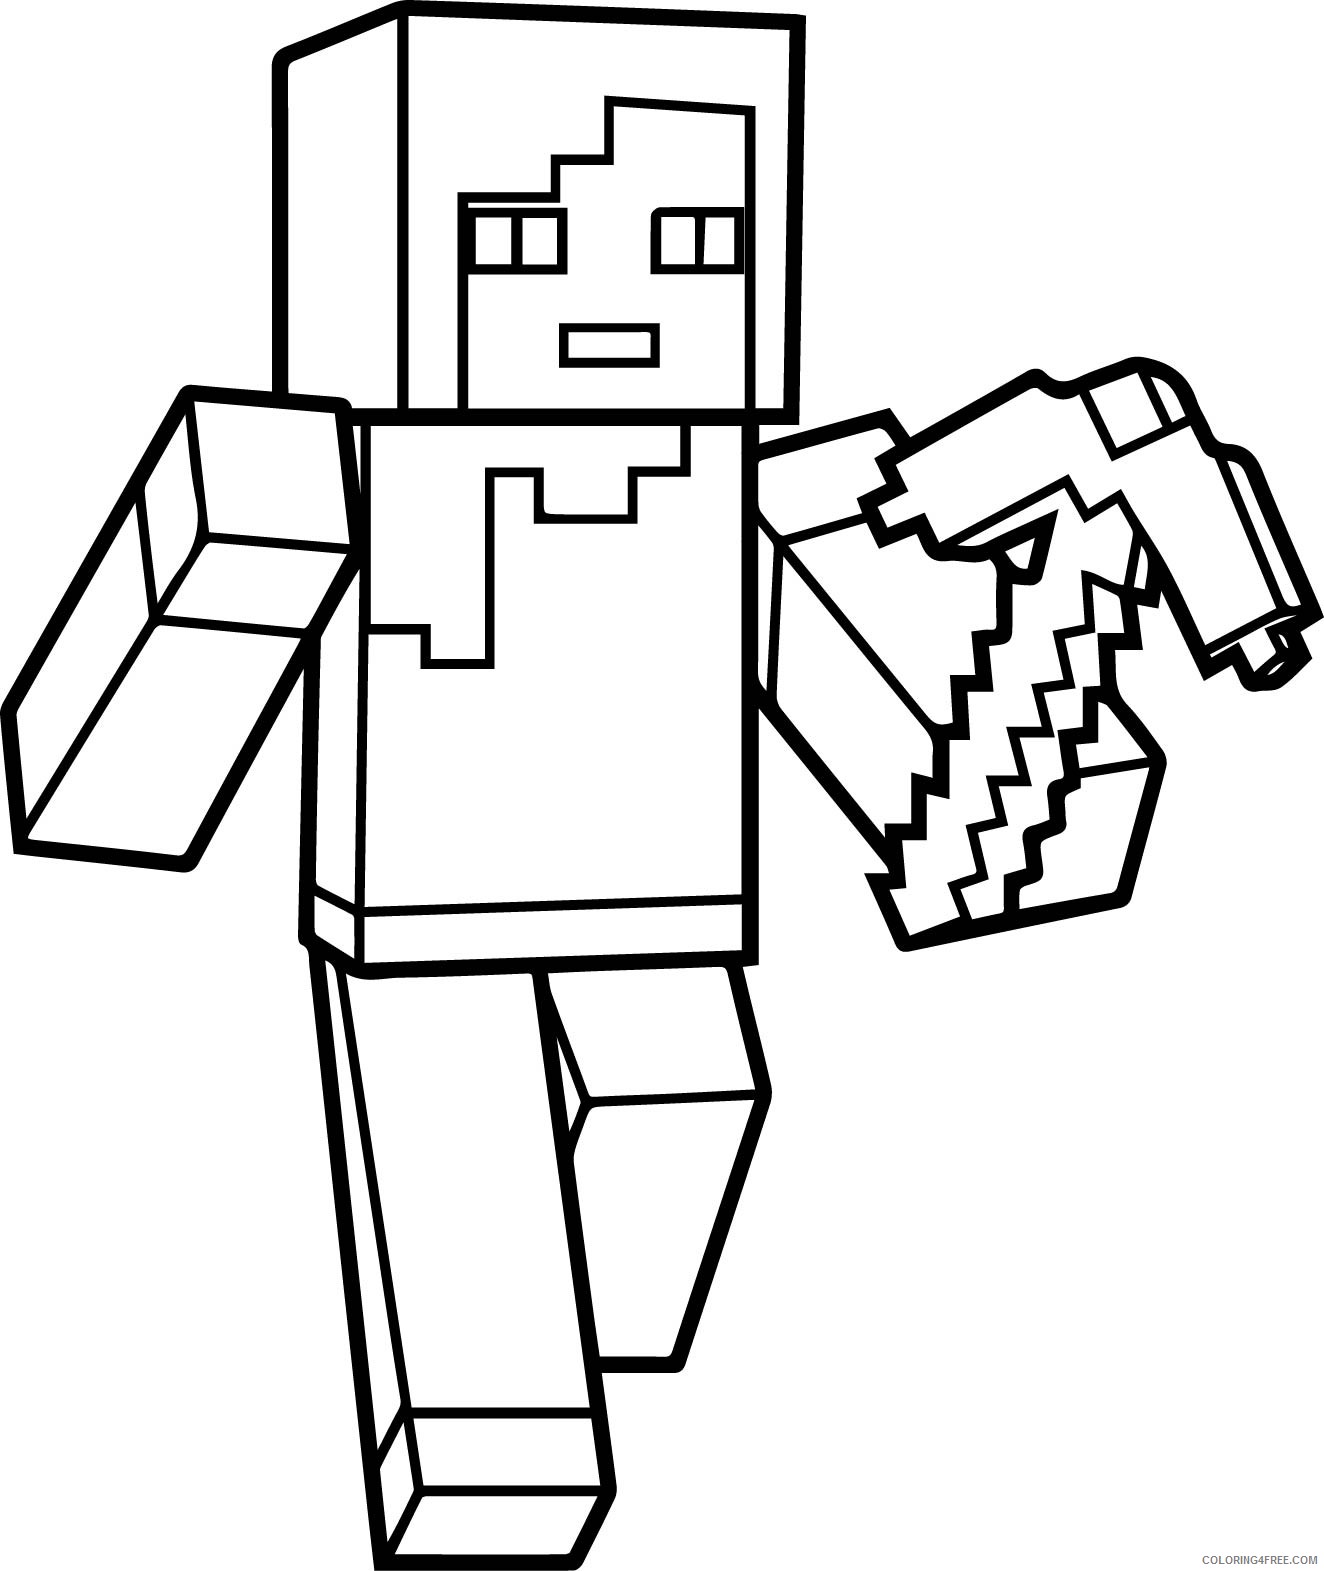 Minecraft Coloring Pages Wither Skeleton - The world of minecraft is ...